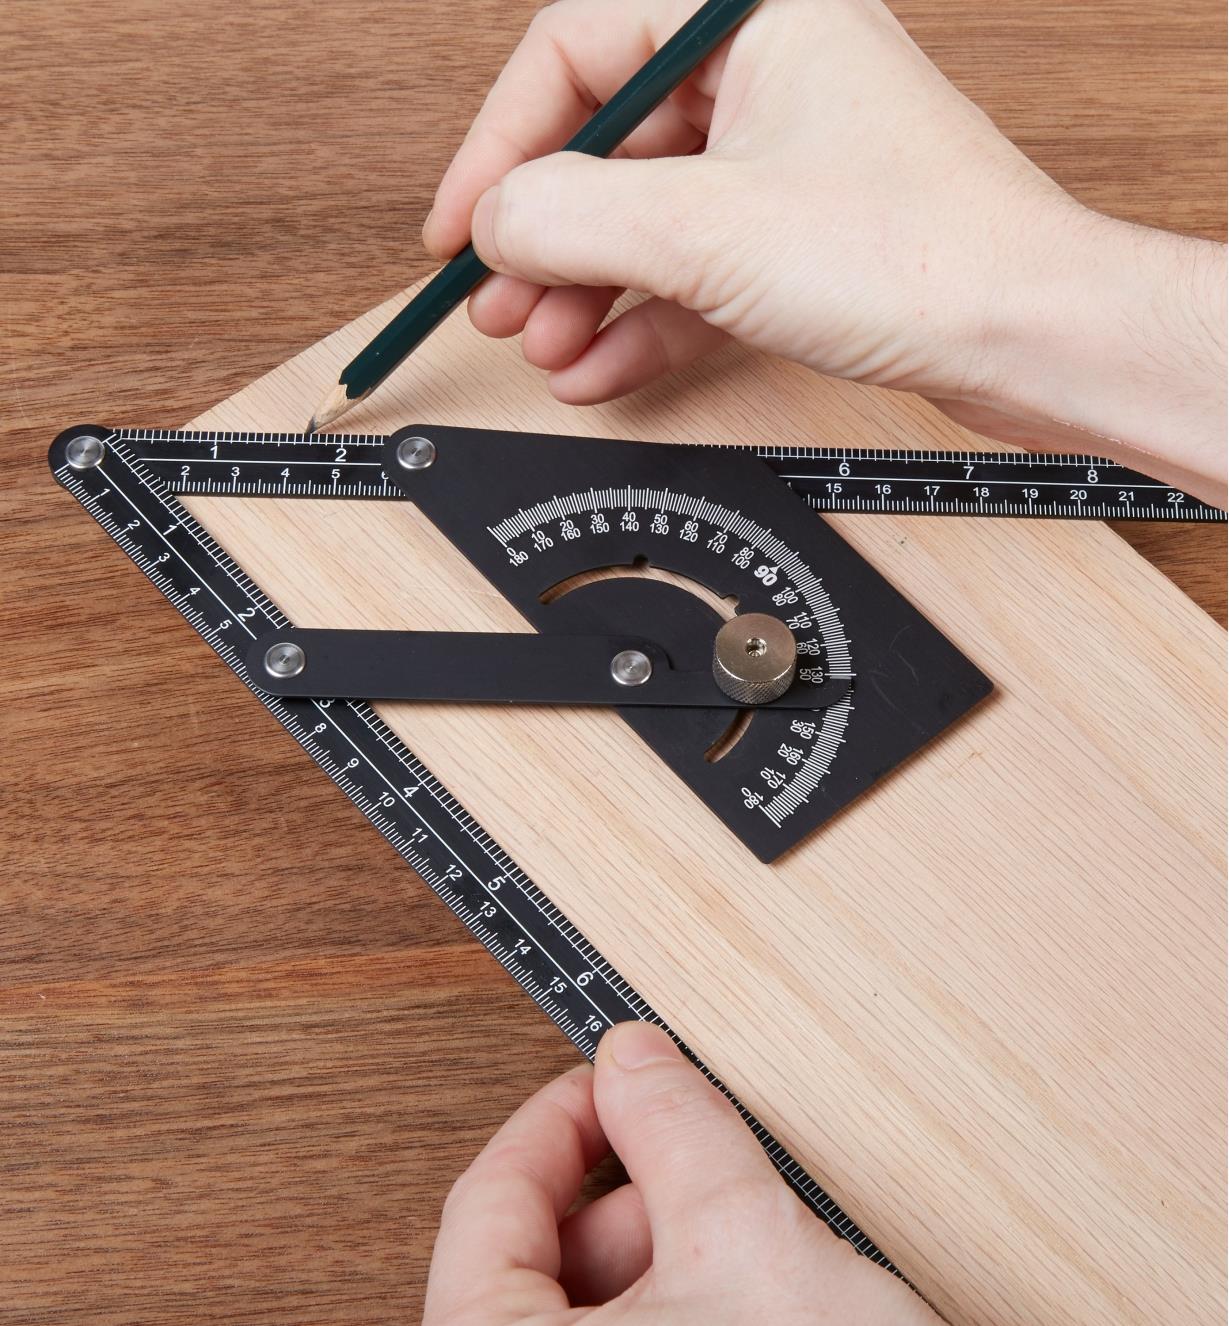 Using a Protractor Square to transfer an angle to a workpiece